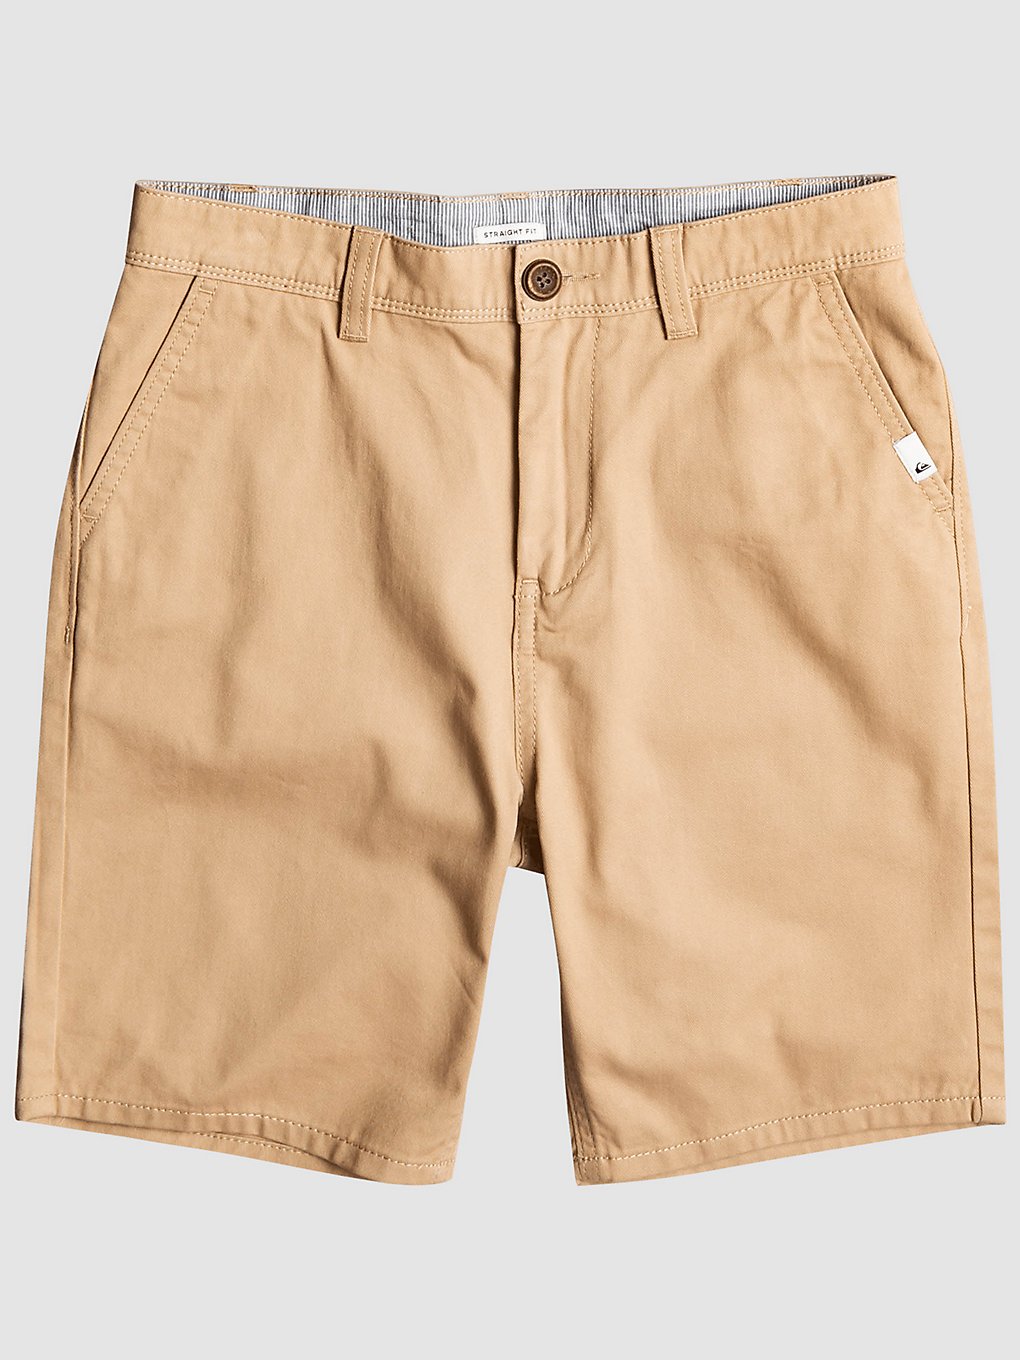 Quiksilver Everyday Chino Light Shorts incense